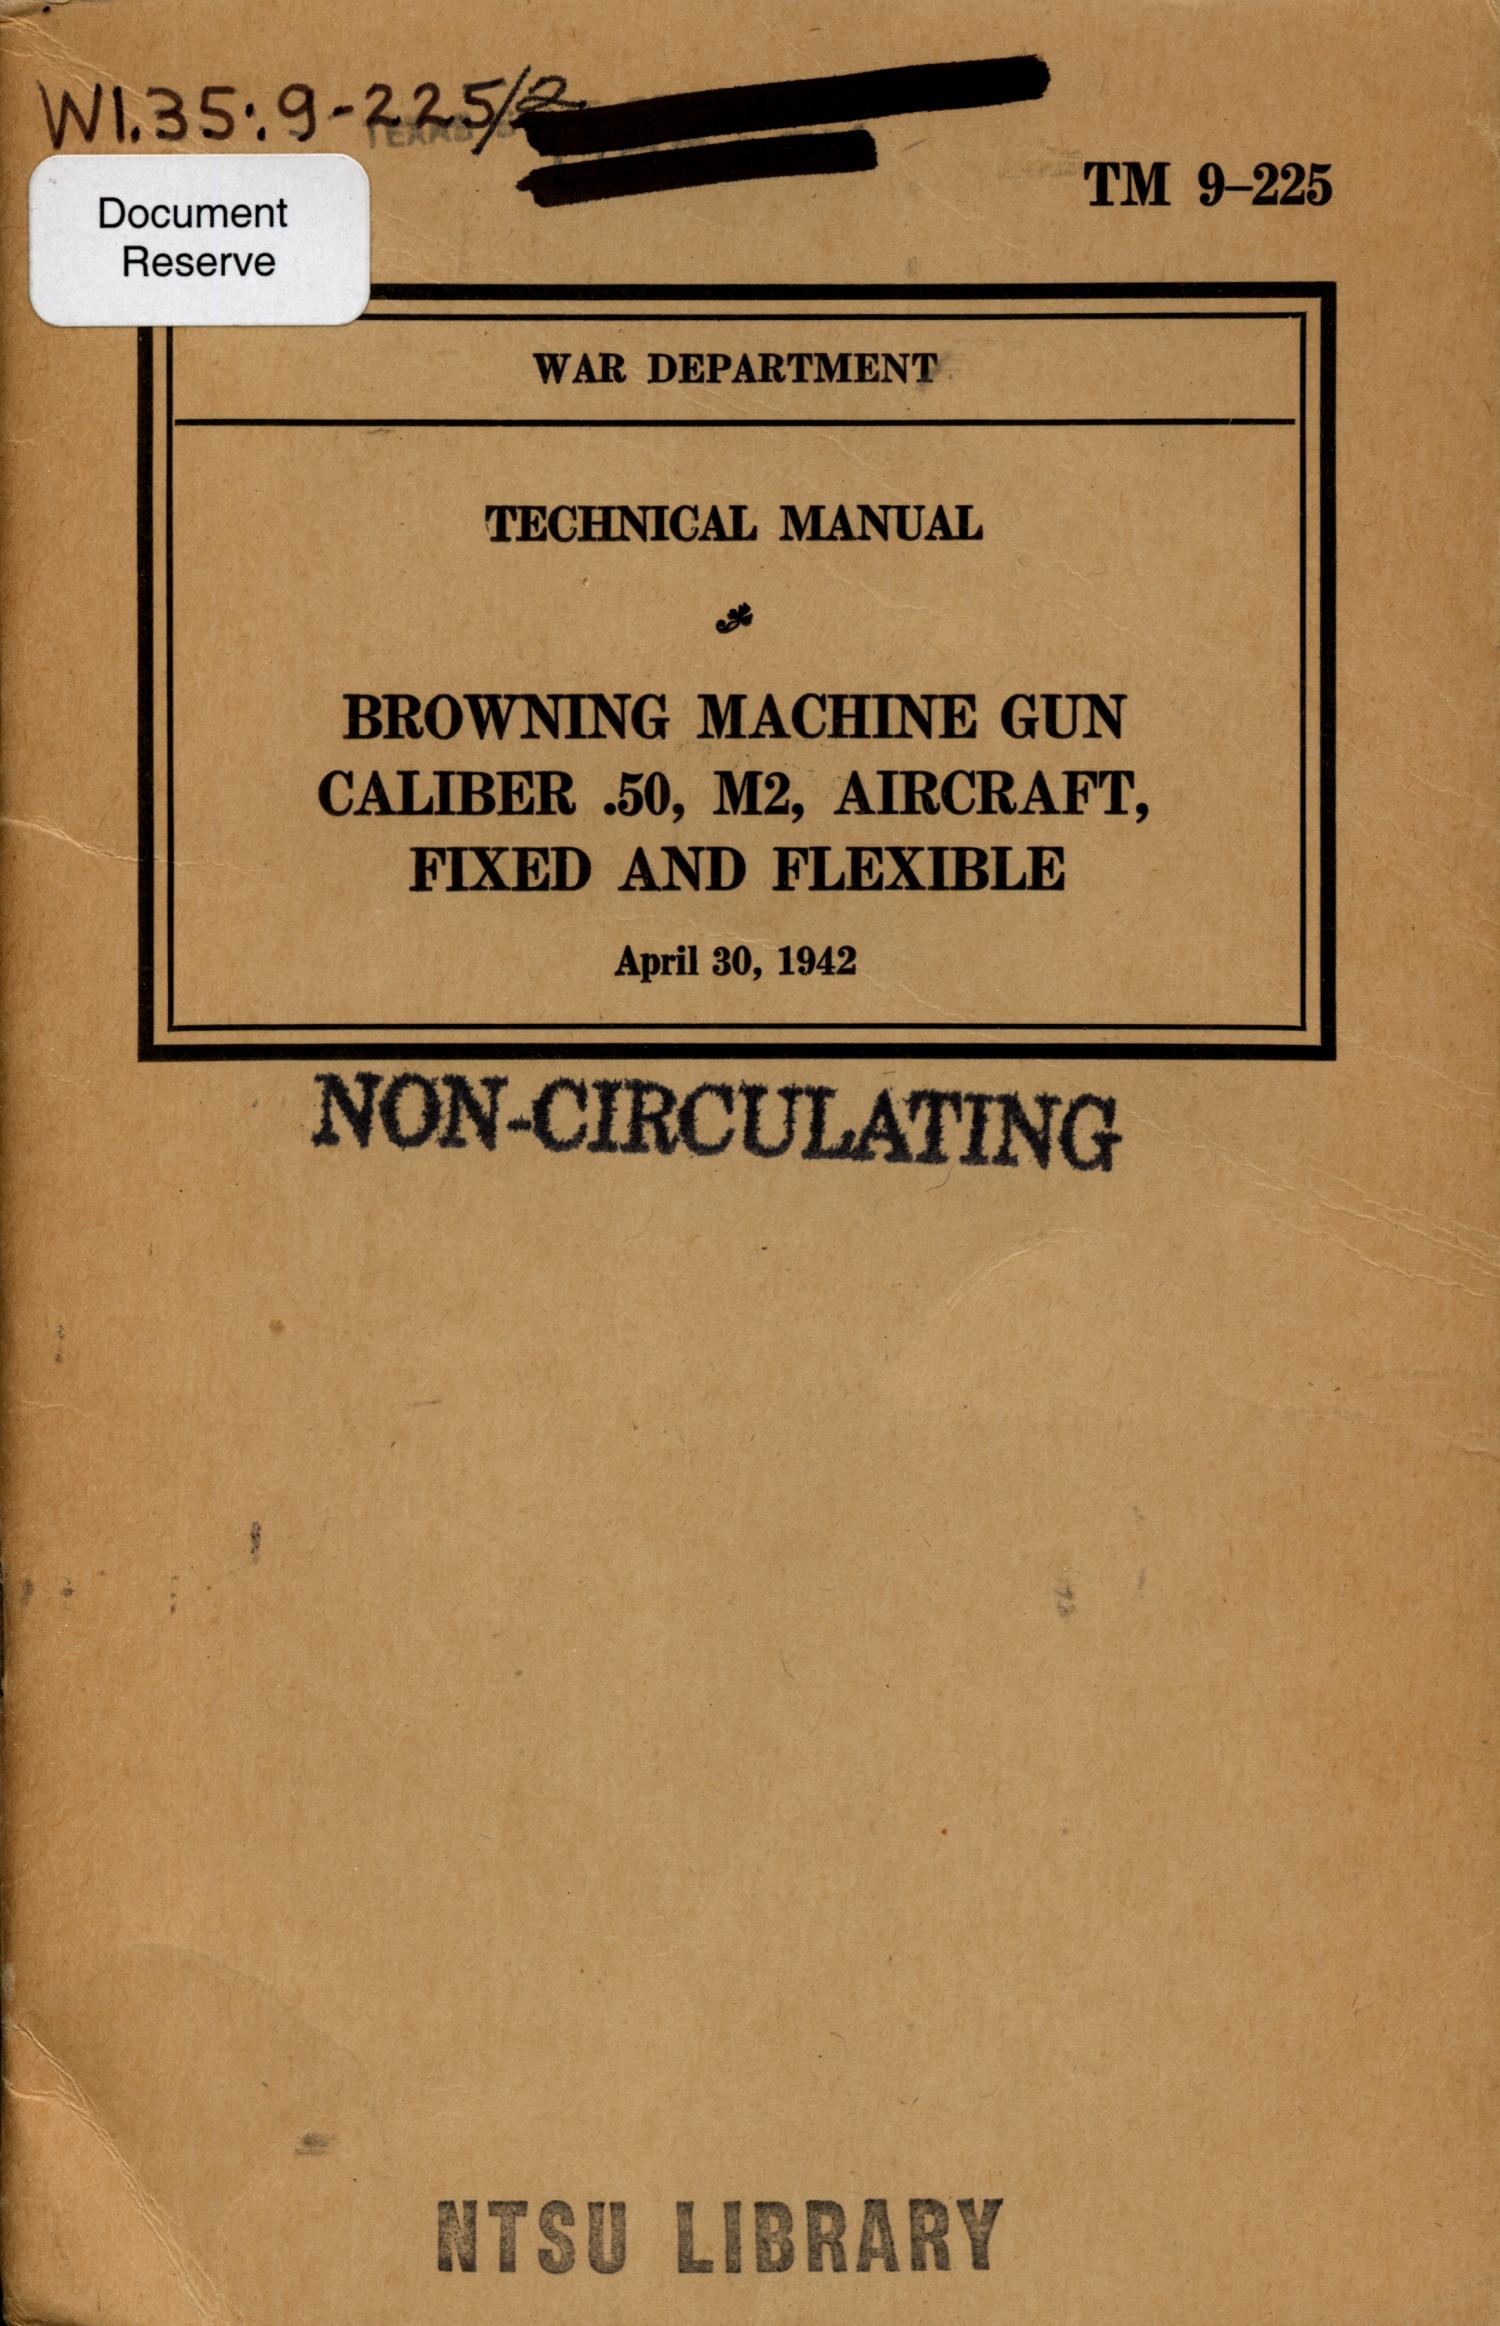 Browning machine gun caliber .50, M2, aircraft, fixed and flexible.
                                                
                                                    Front Cover
                                                